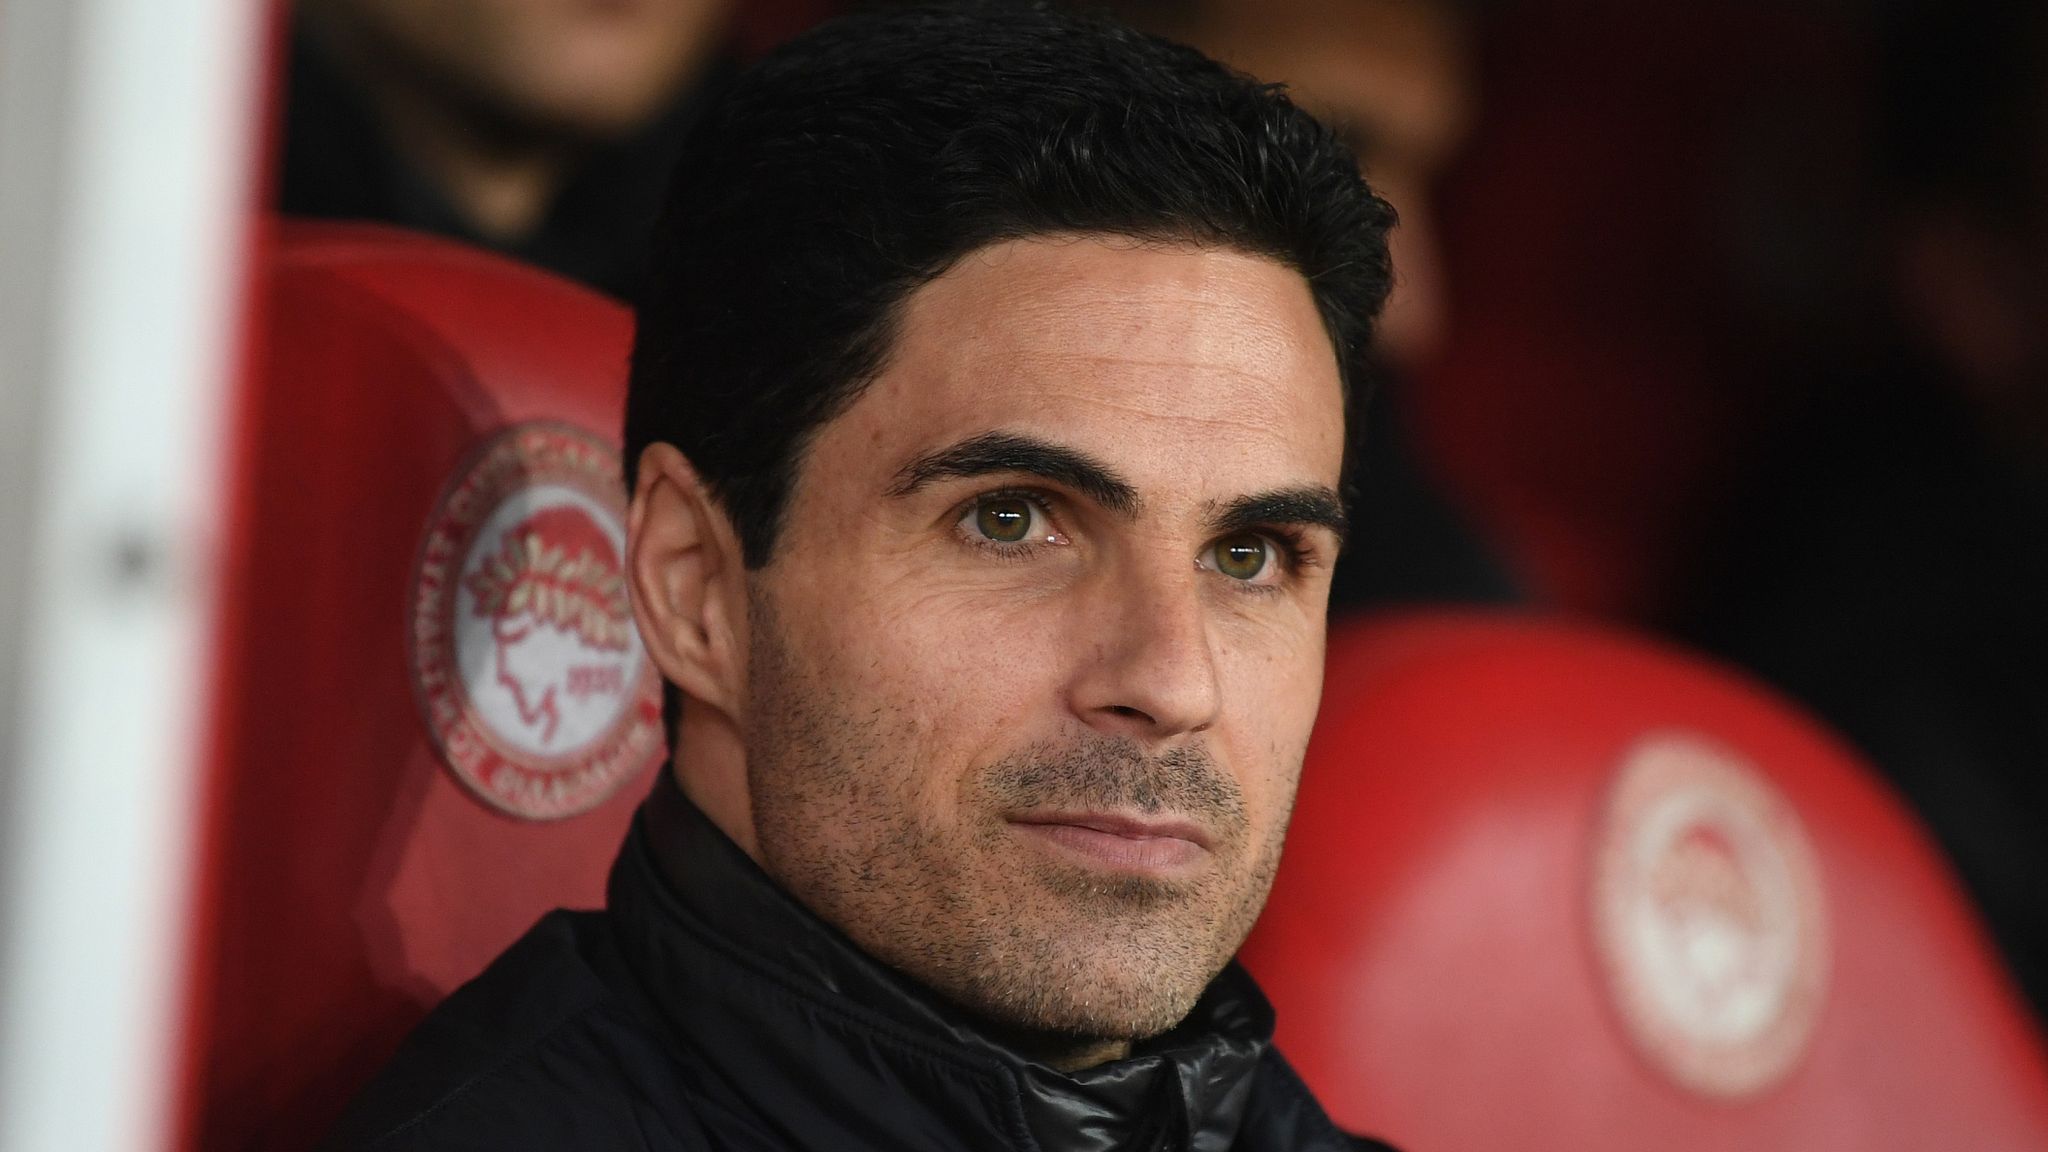 Mikel Arteta's wife says coronavirus symptoms would not have stopped  Arsenal head coach from working | Football News | Sky Sports